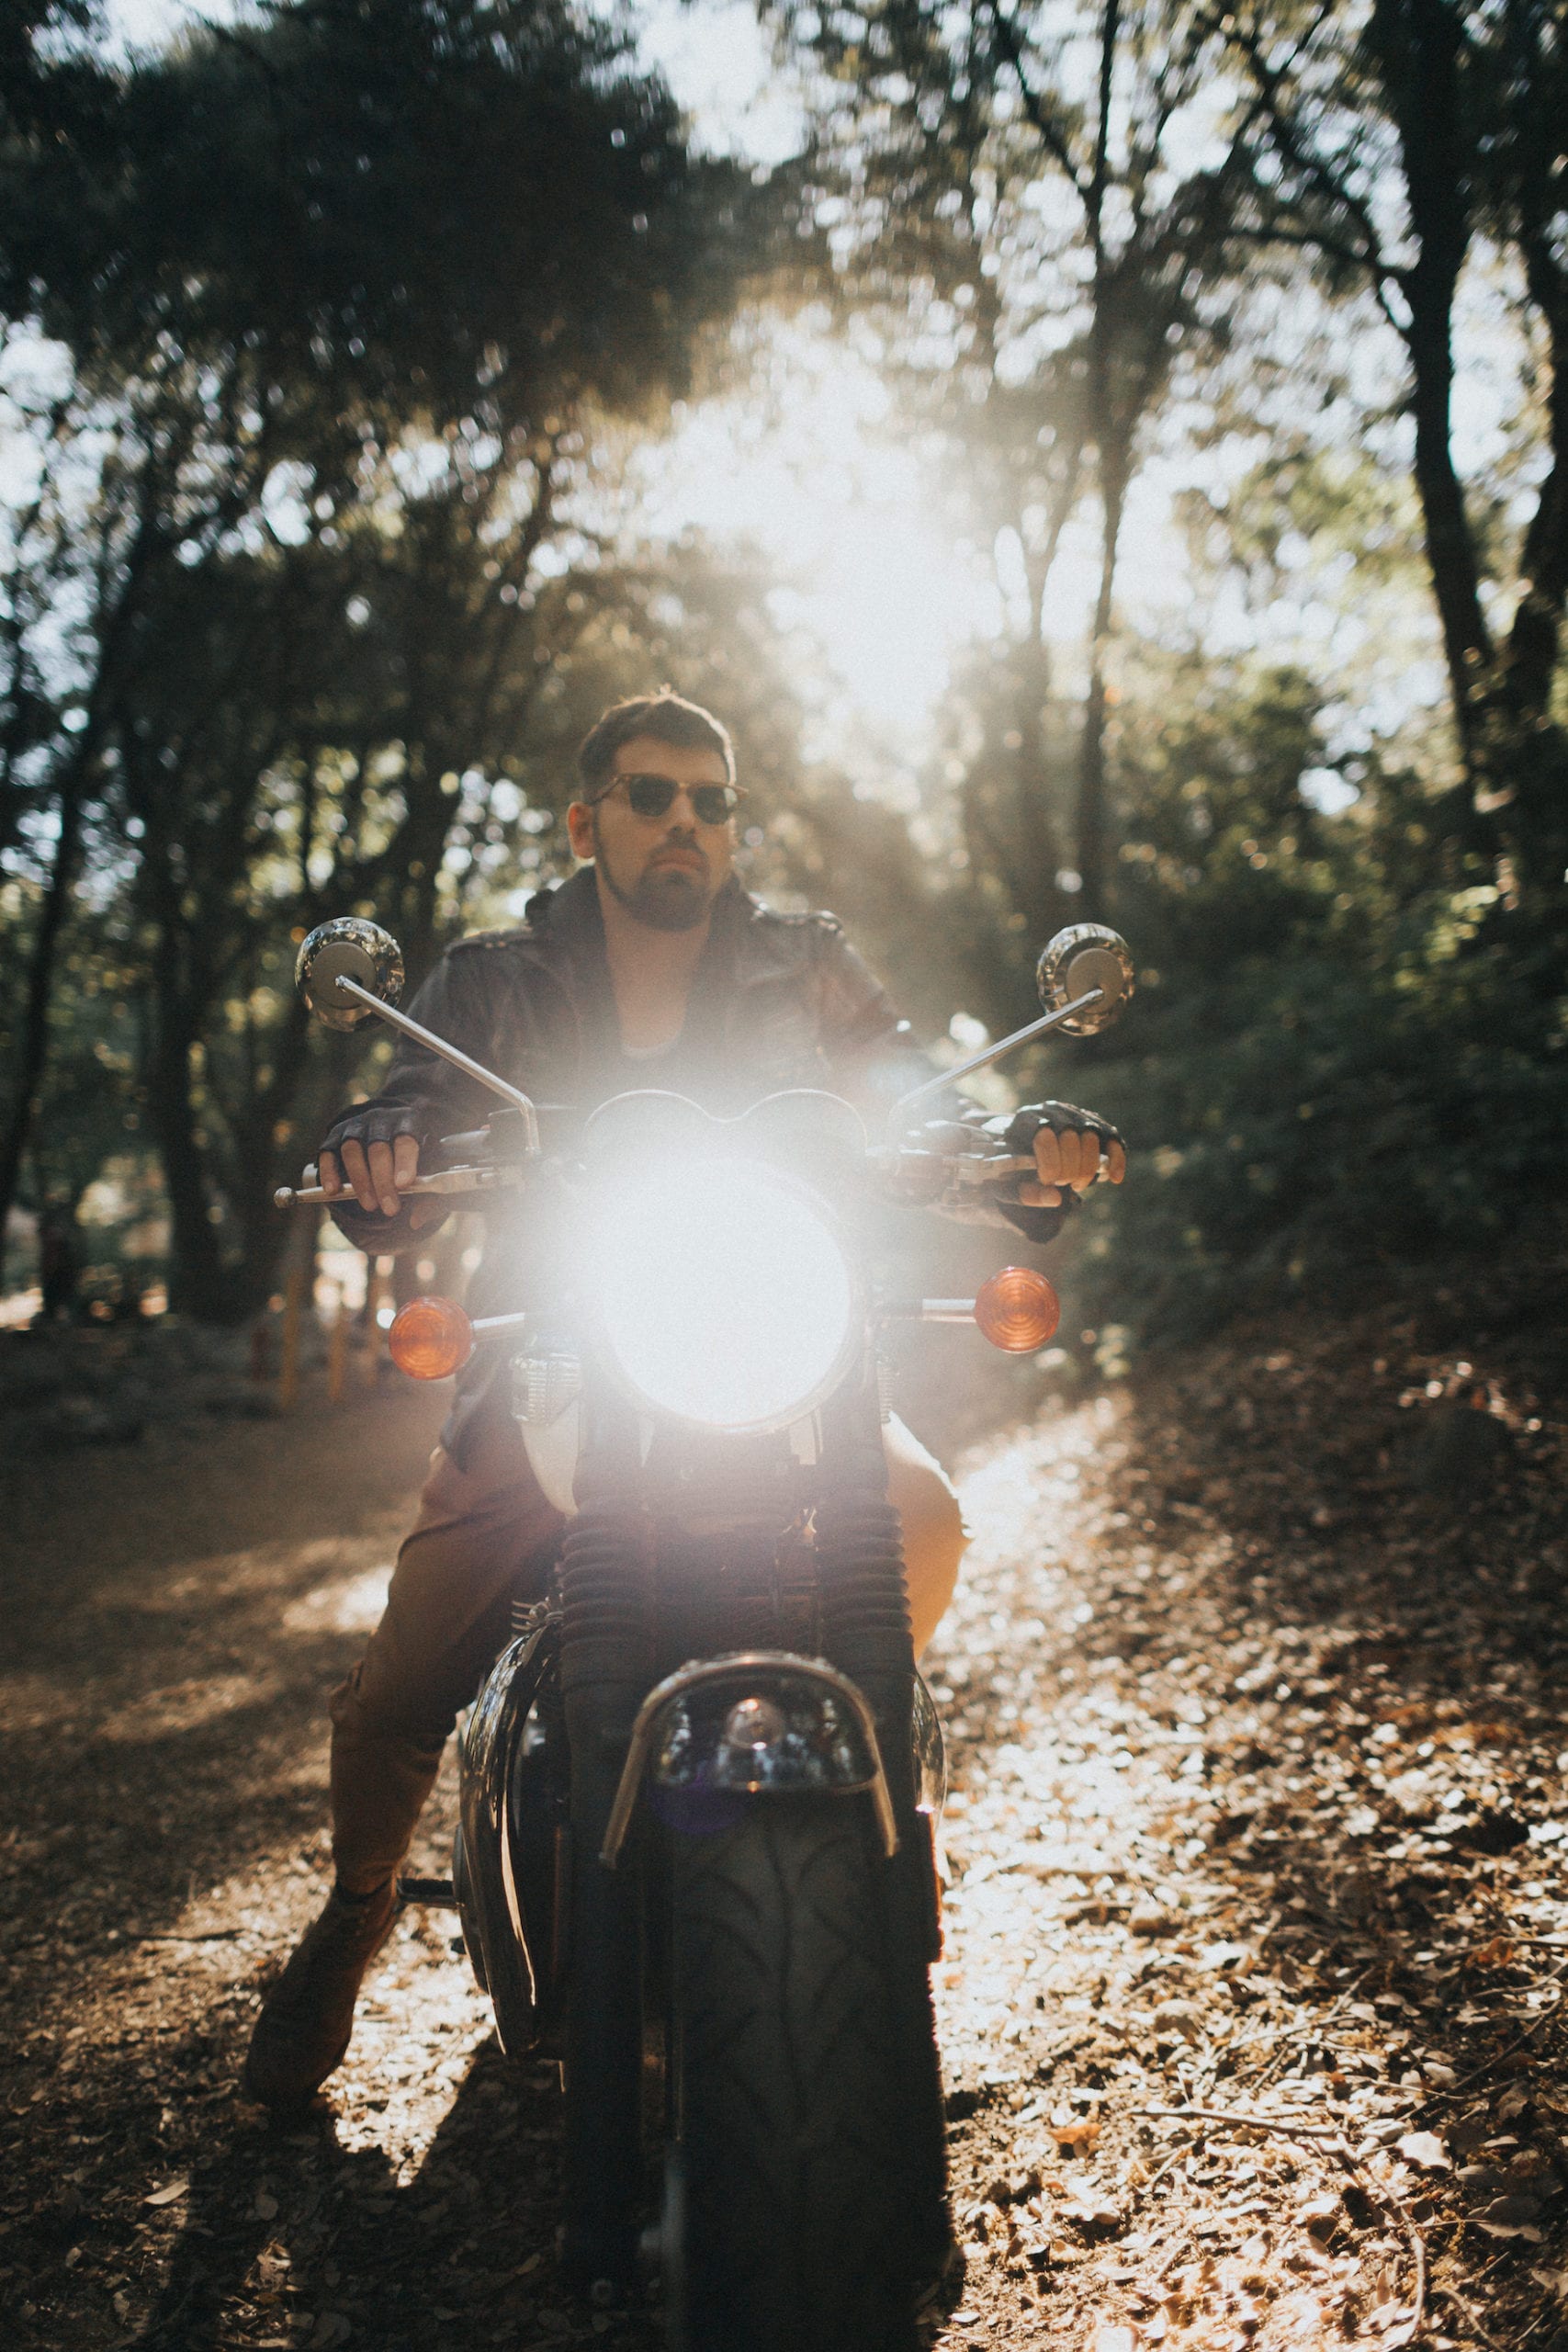 Motorcycle rider wearing shades poses in the middle of the forest, pointing a shining headlight towards the camera